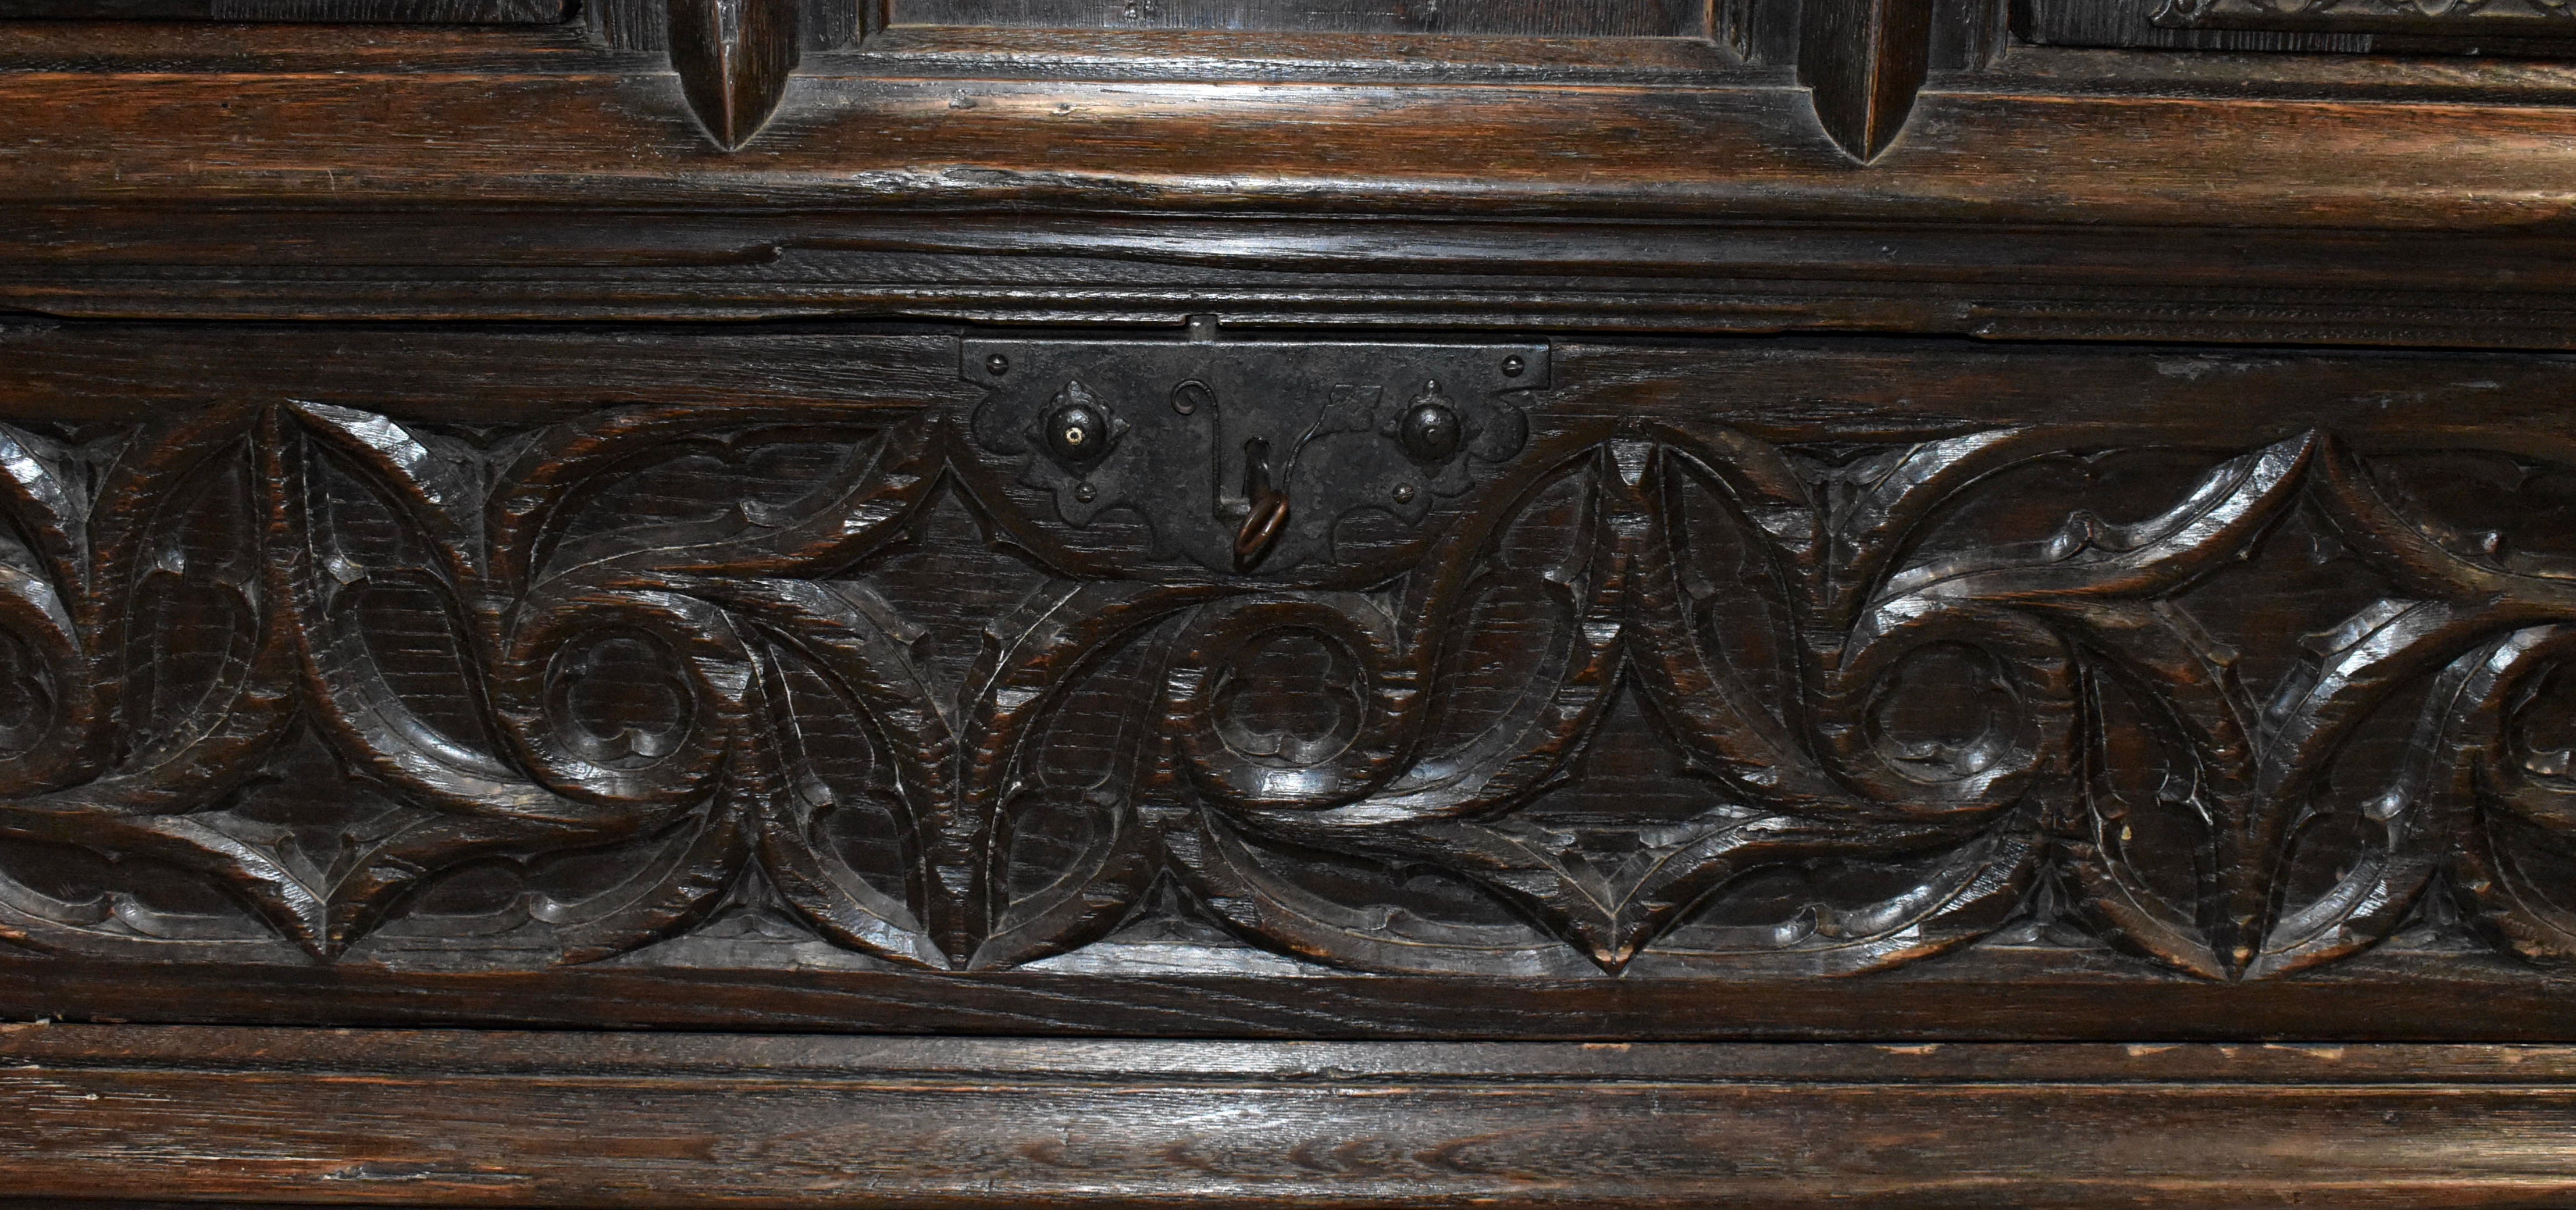 Hand-Carved Oak Gothic Cabinet